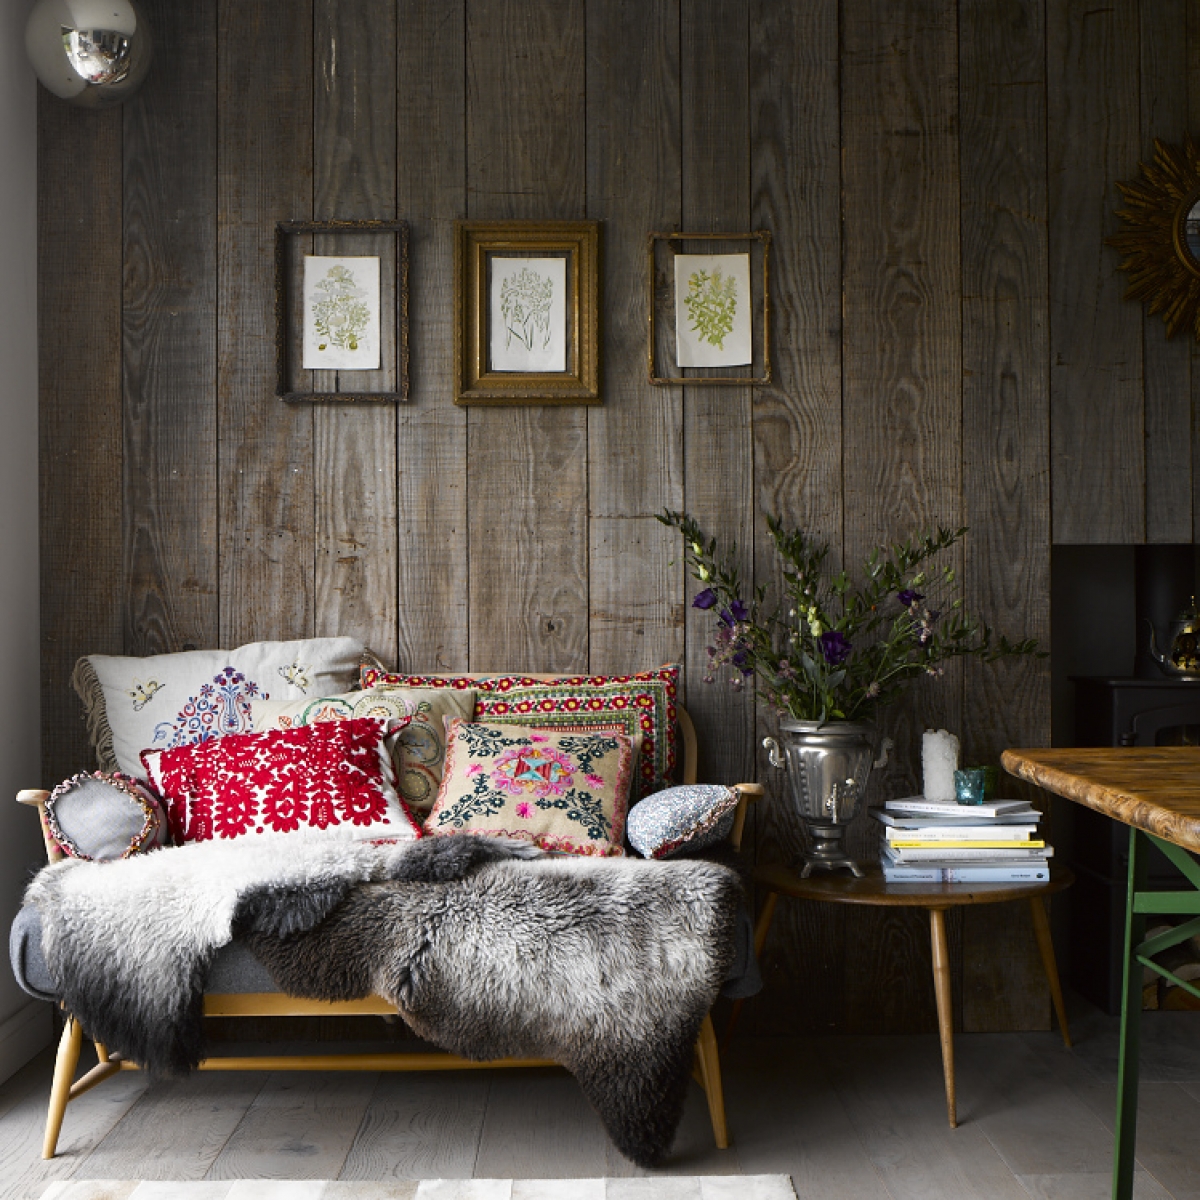 The autumn oersonality loves cosy spaces with wood wall cladding, animal skins and retro furniture, as well as tribal ethinic textiles. Home belongs to designer Oliver Heath, Image from Emiy Henson